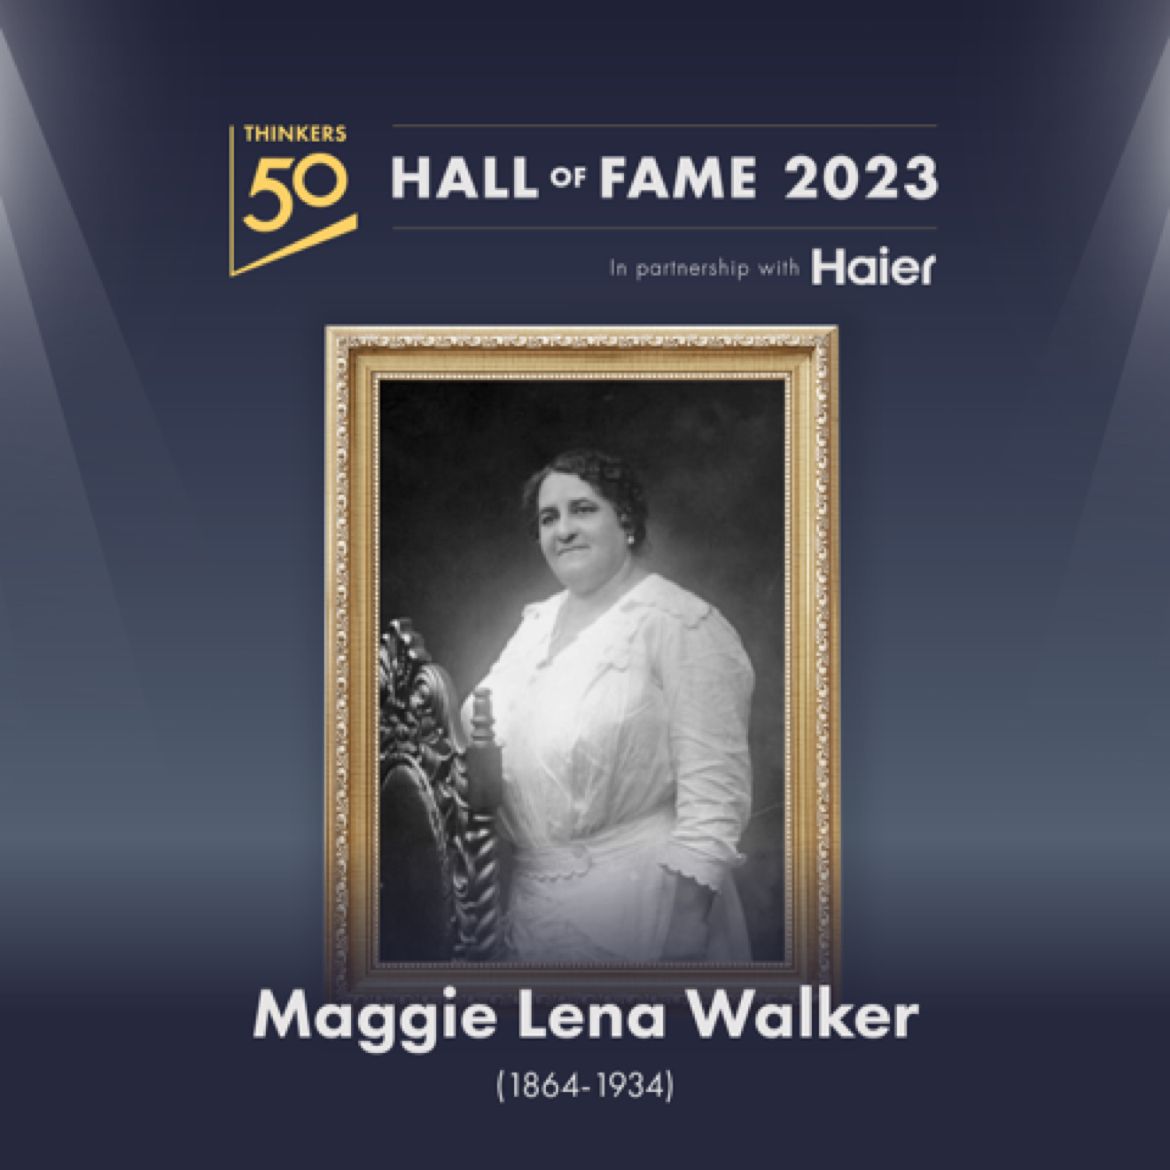 New inductee into @thinkers50 Hall of Fame! @leoncprieto & I were honored to amplify her contributions in our book 'African American Management History: Insights on Gaining a Cooperative Advantage.' thinkers50.com/blog/thinkers5… #Entrepreneurship #Leadership #ManagementHistory